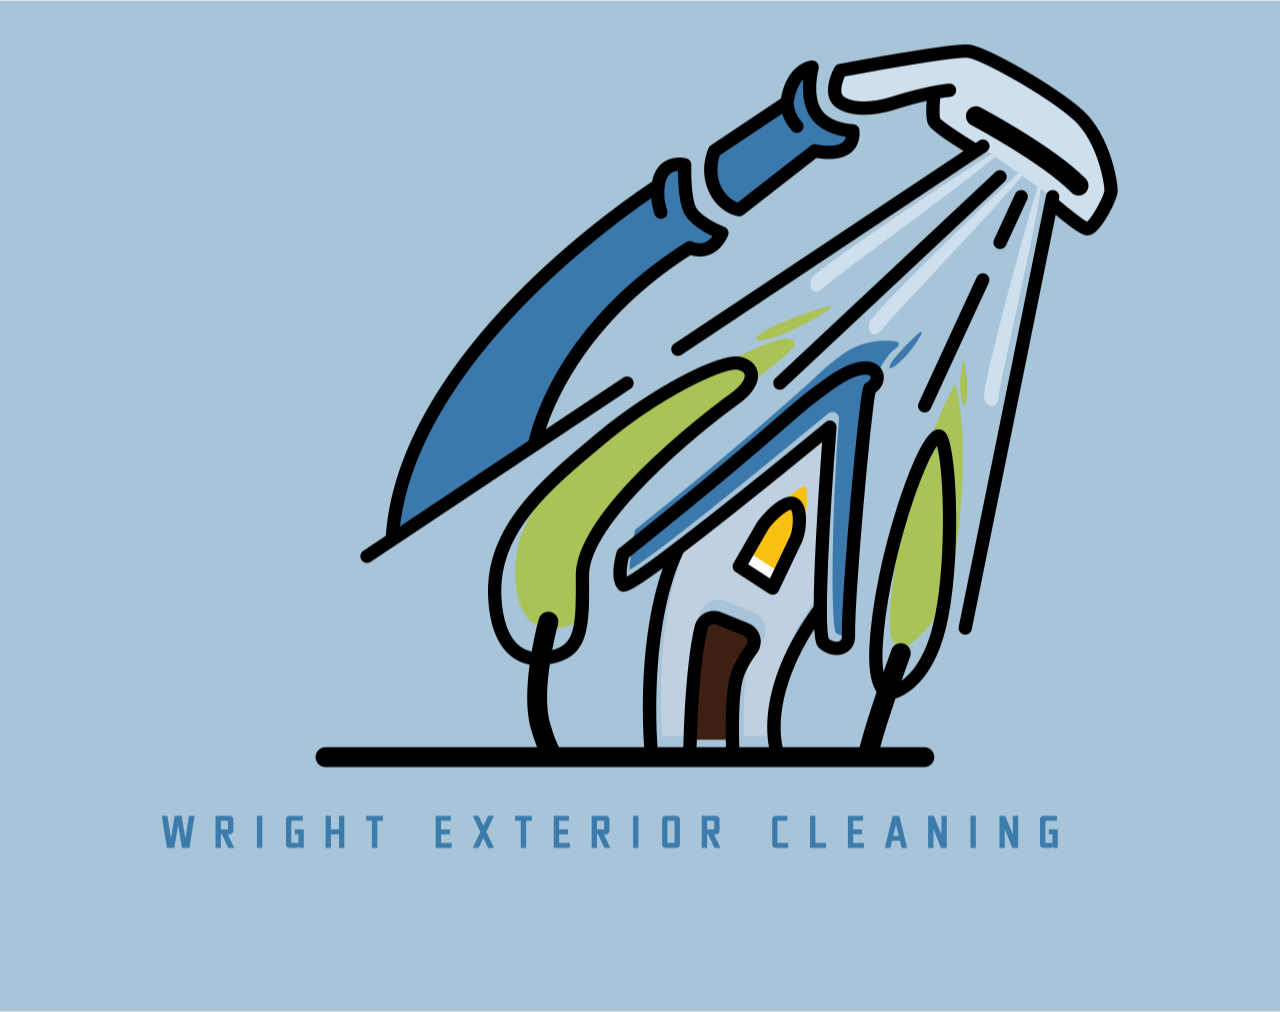 Expert Gutter Cleaning Services by Wright Exterior Cleaning 's logo